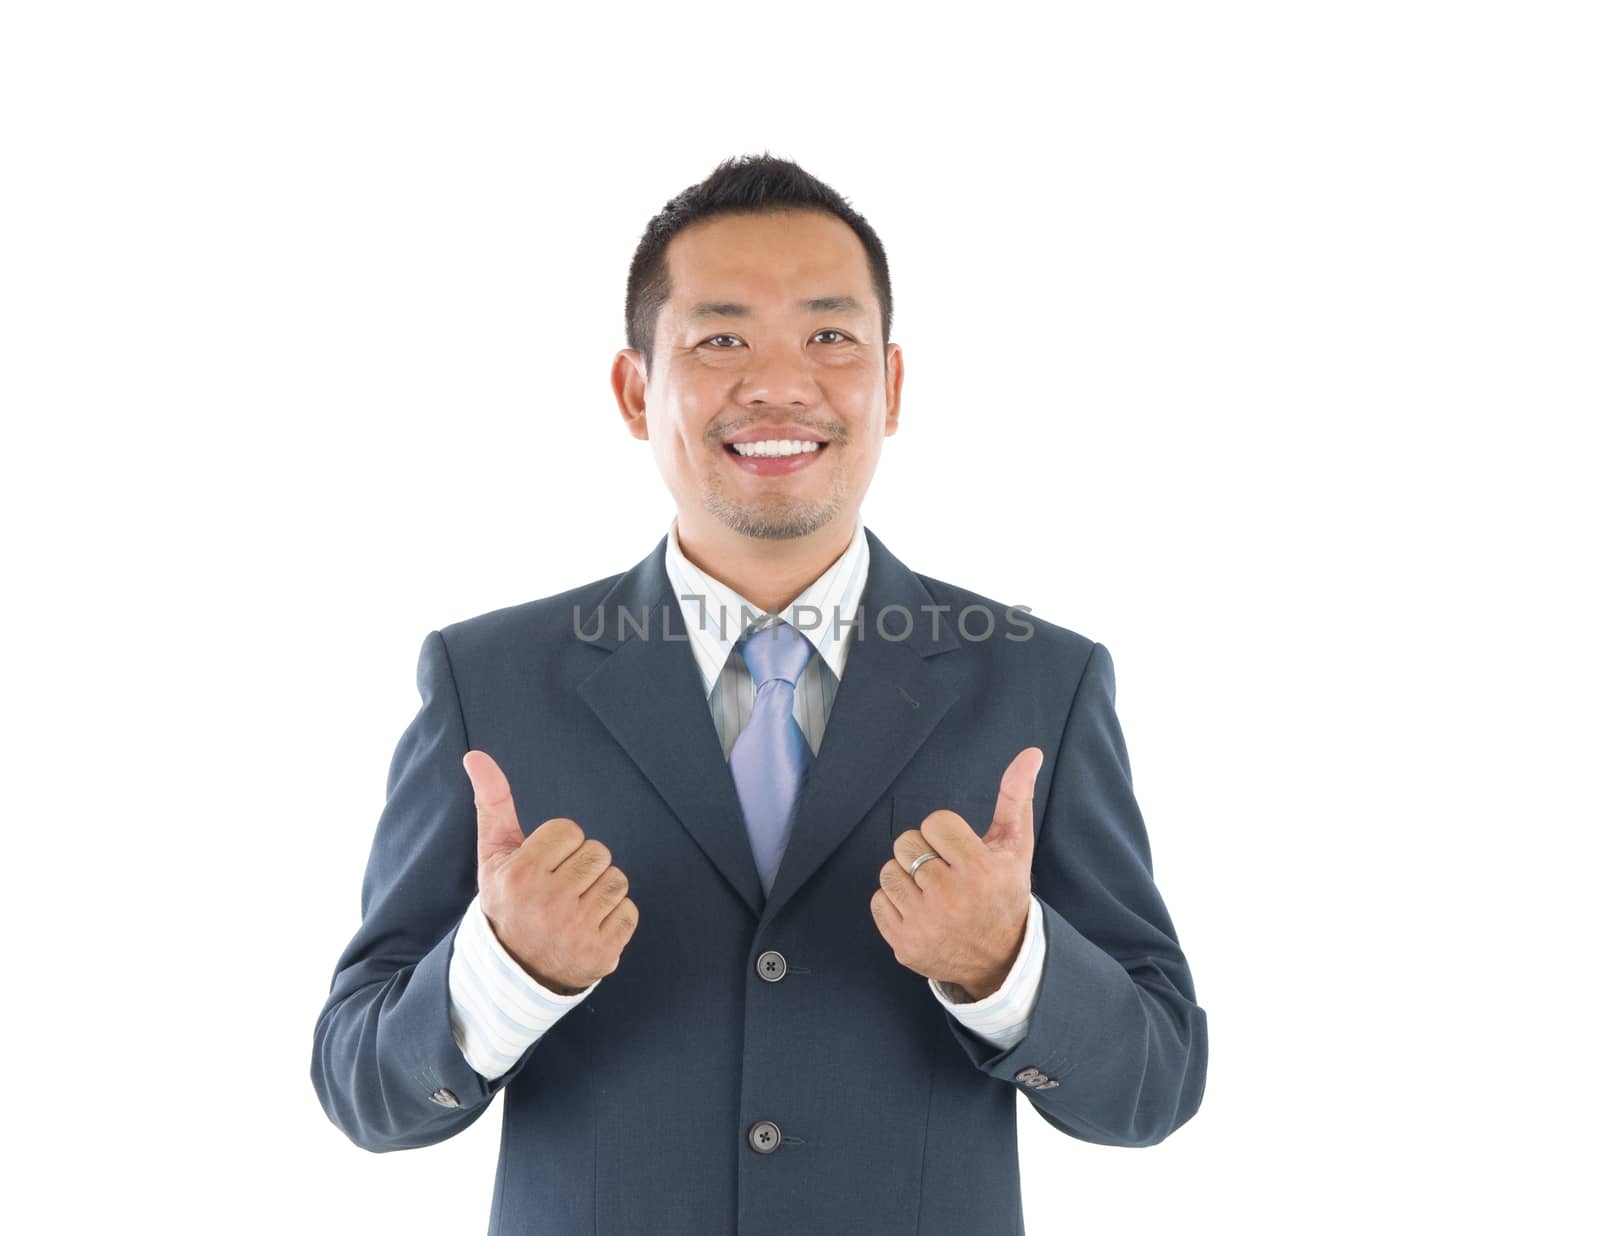 Thumbs up 40s indonesian businessman giving thumbs up over white background